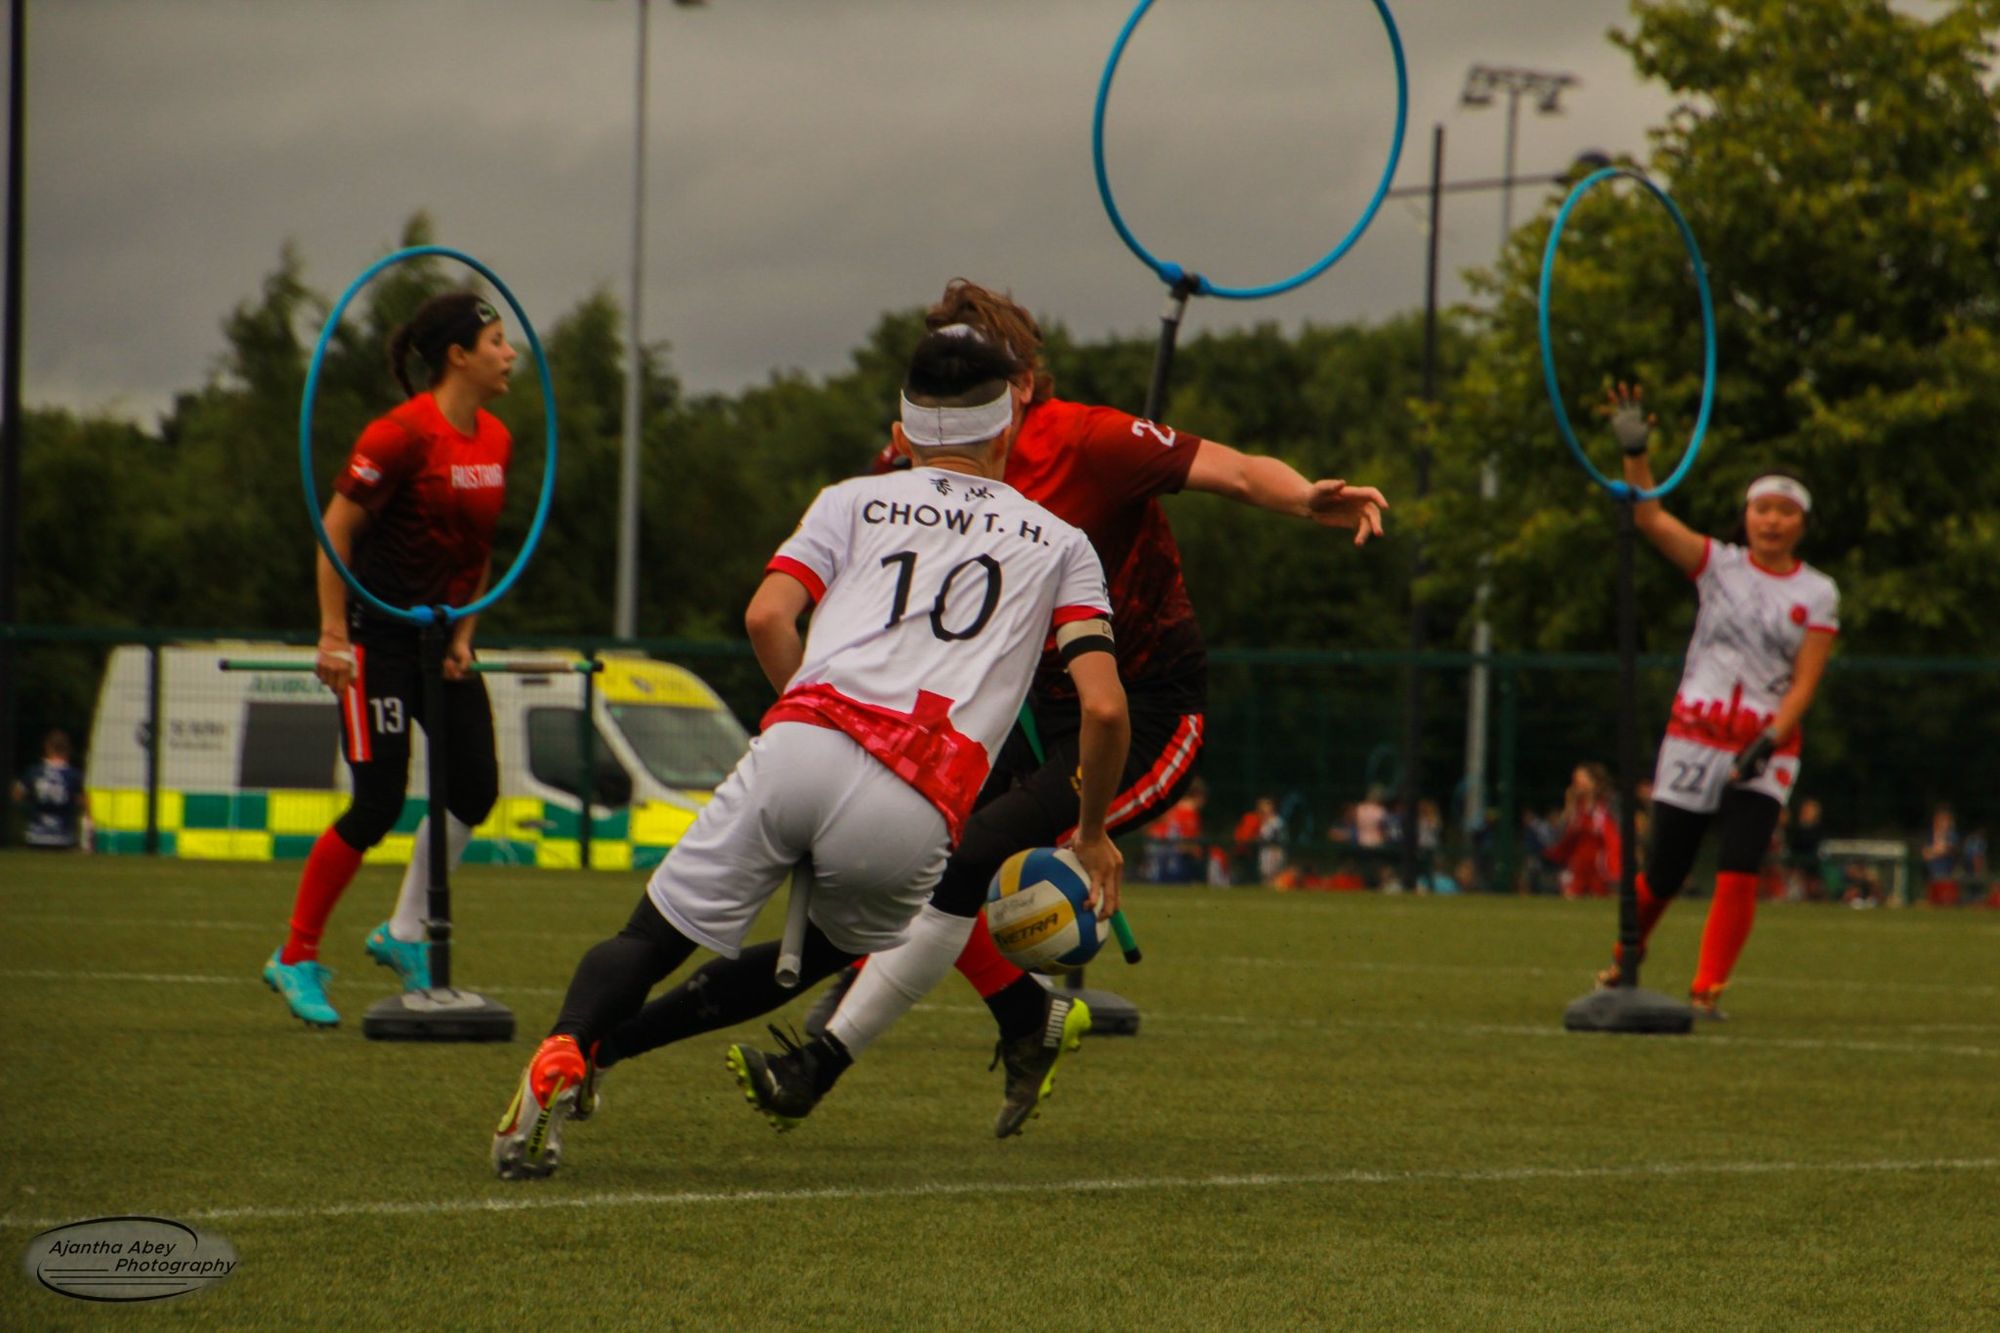 Team Hong Kong finishes 19th in the IQA European Games 2022